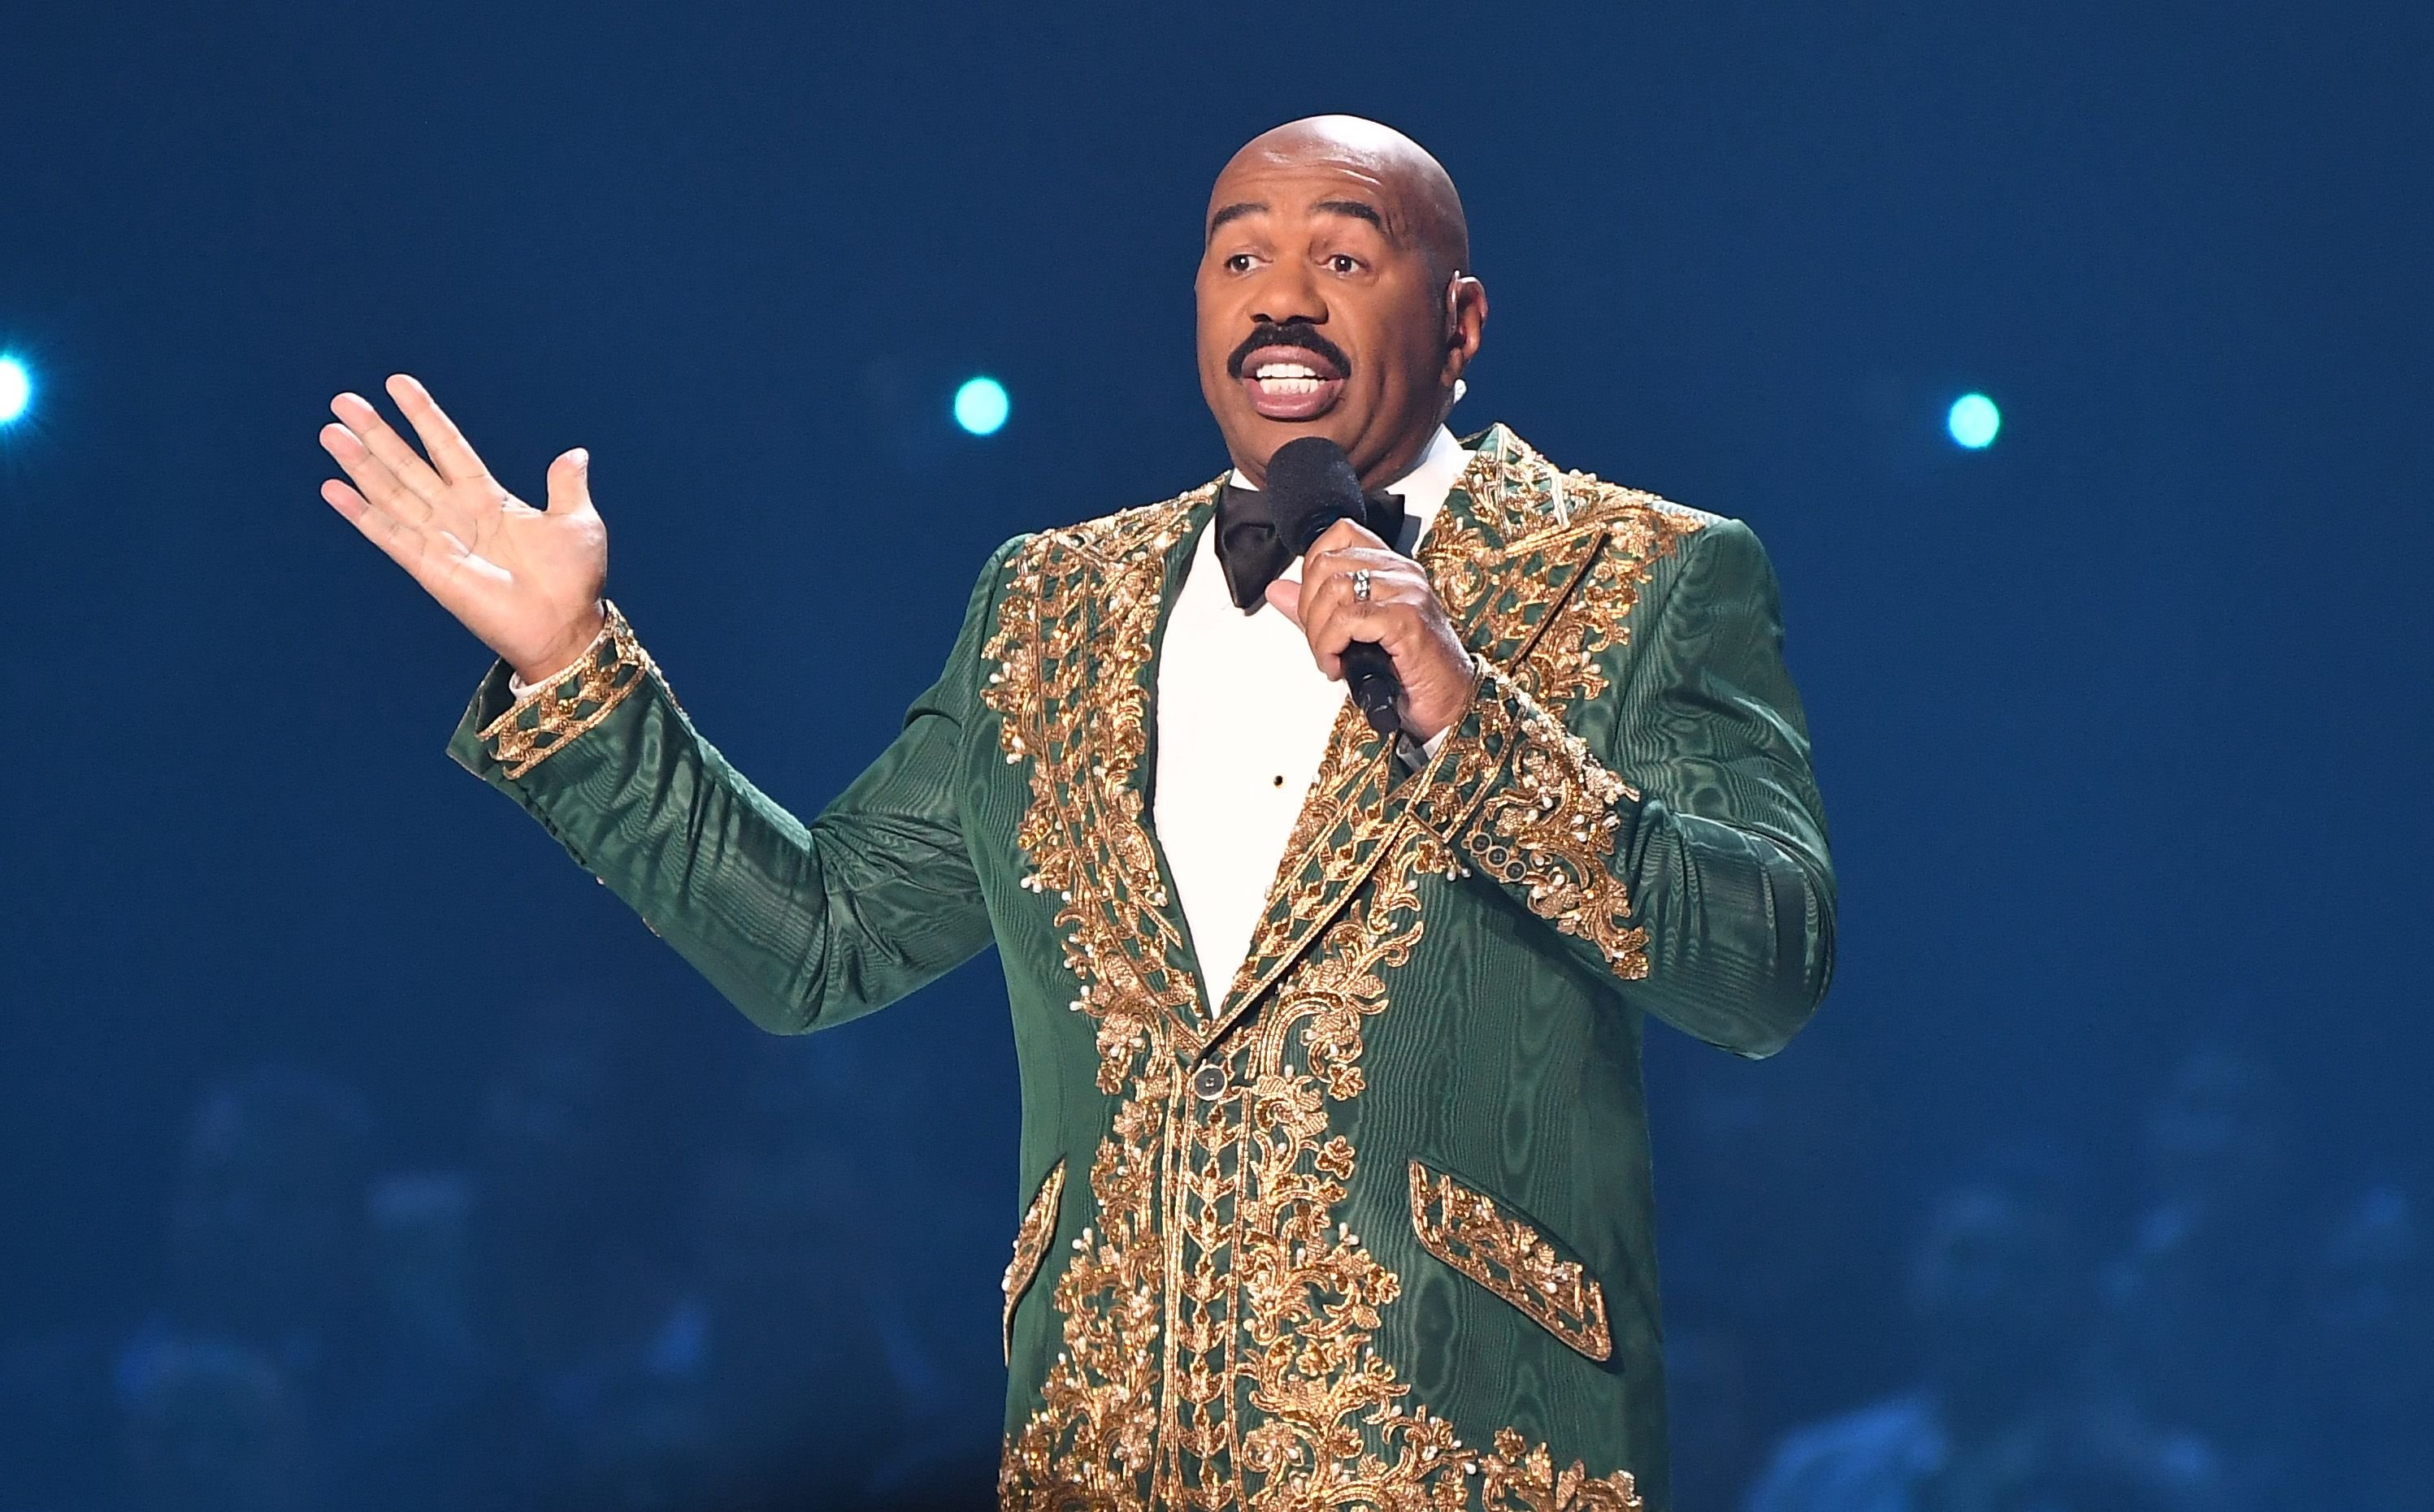 Steve Harvey speaks during the Miss Universe pageant at Tyler Perry Studios on December 08, 2019. | Photo: Getty Images